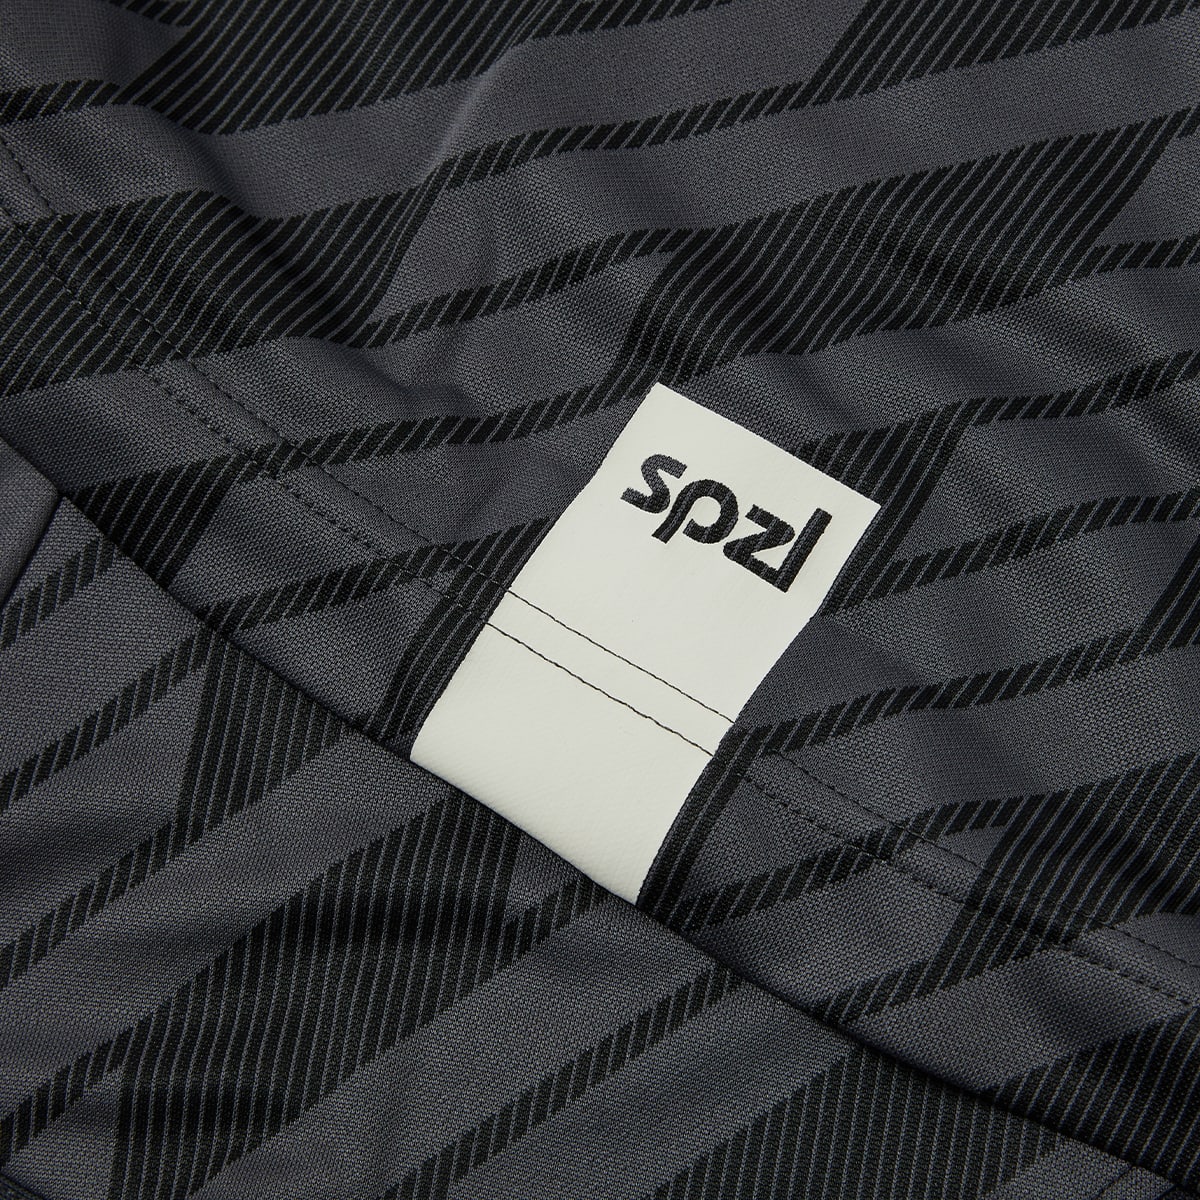 Adidas New Order x SPZL Football Jersey (Night Grey) | END. Launches